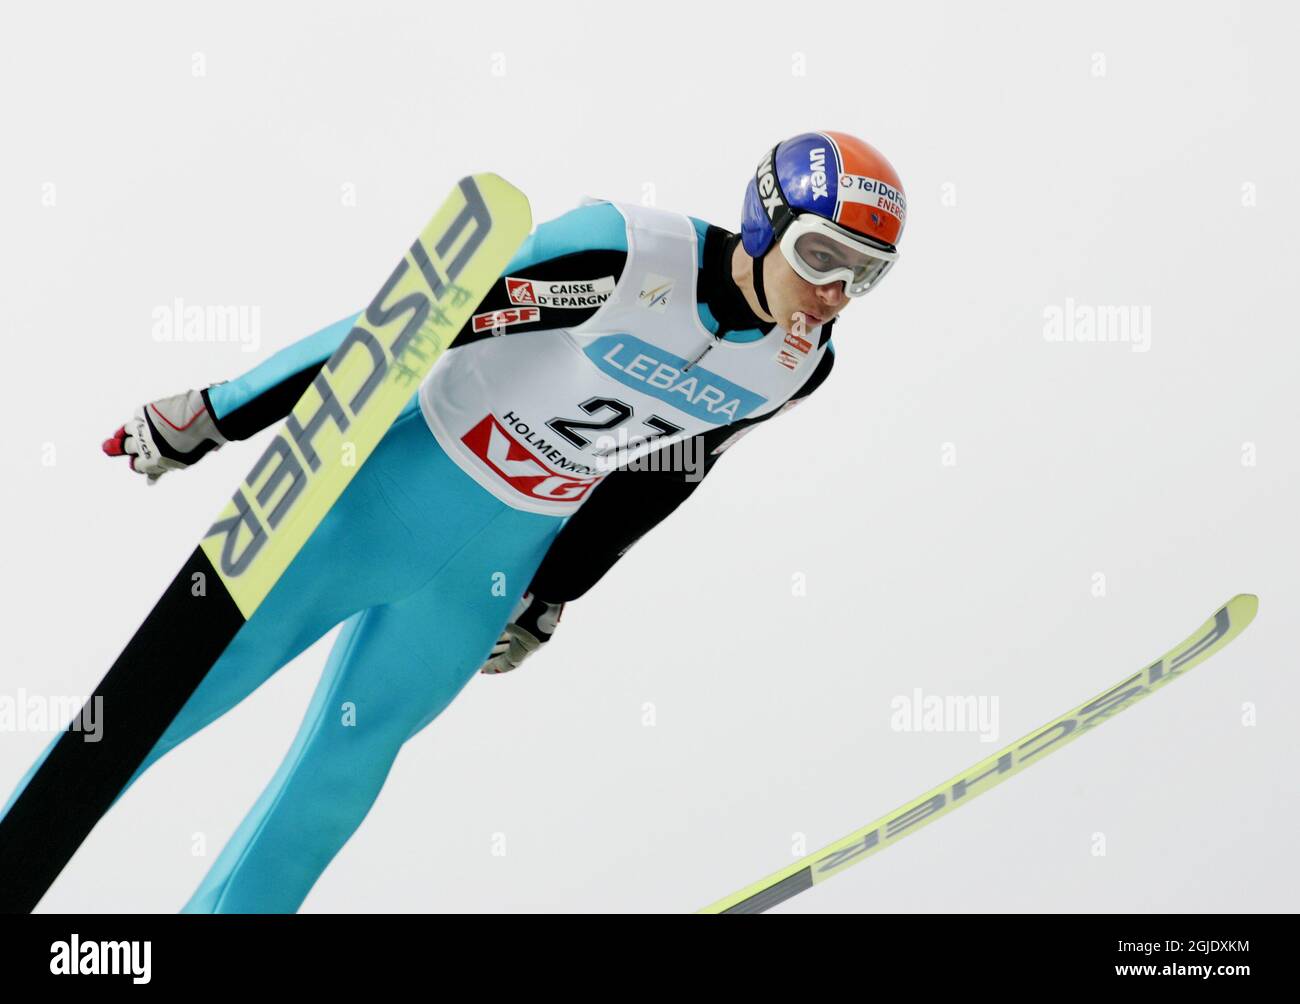 David Lazzaroni of France placed 7 at the World Cup ski jumping competition at Holmenkollen Oslo. Stock Photo